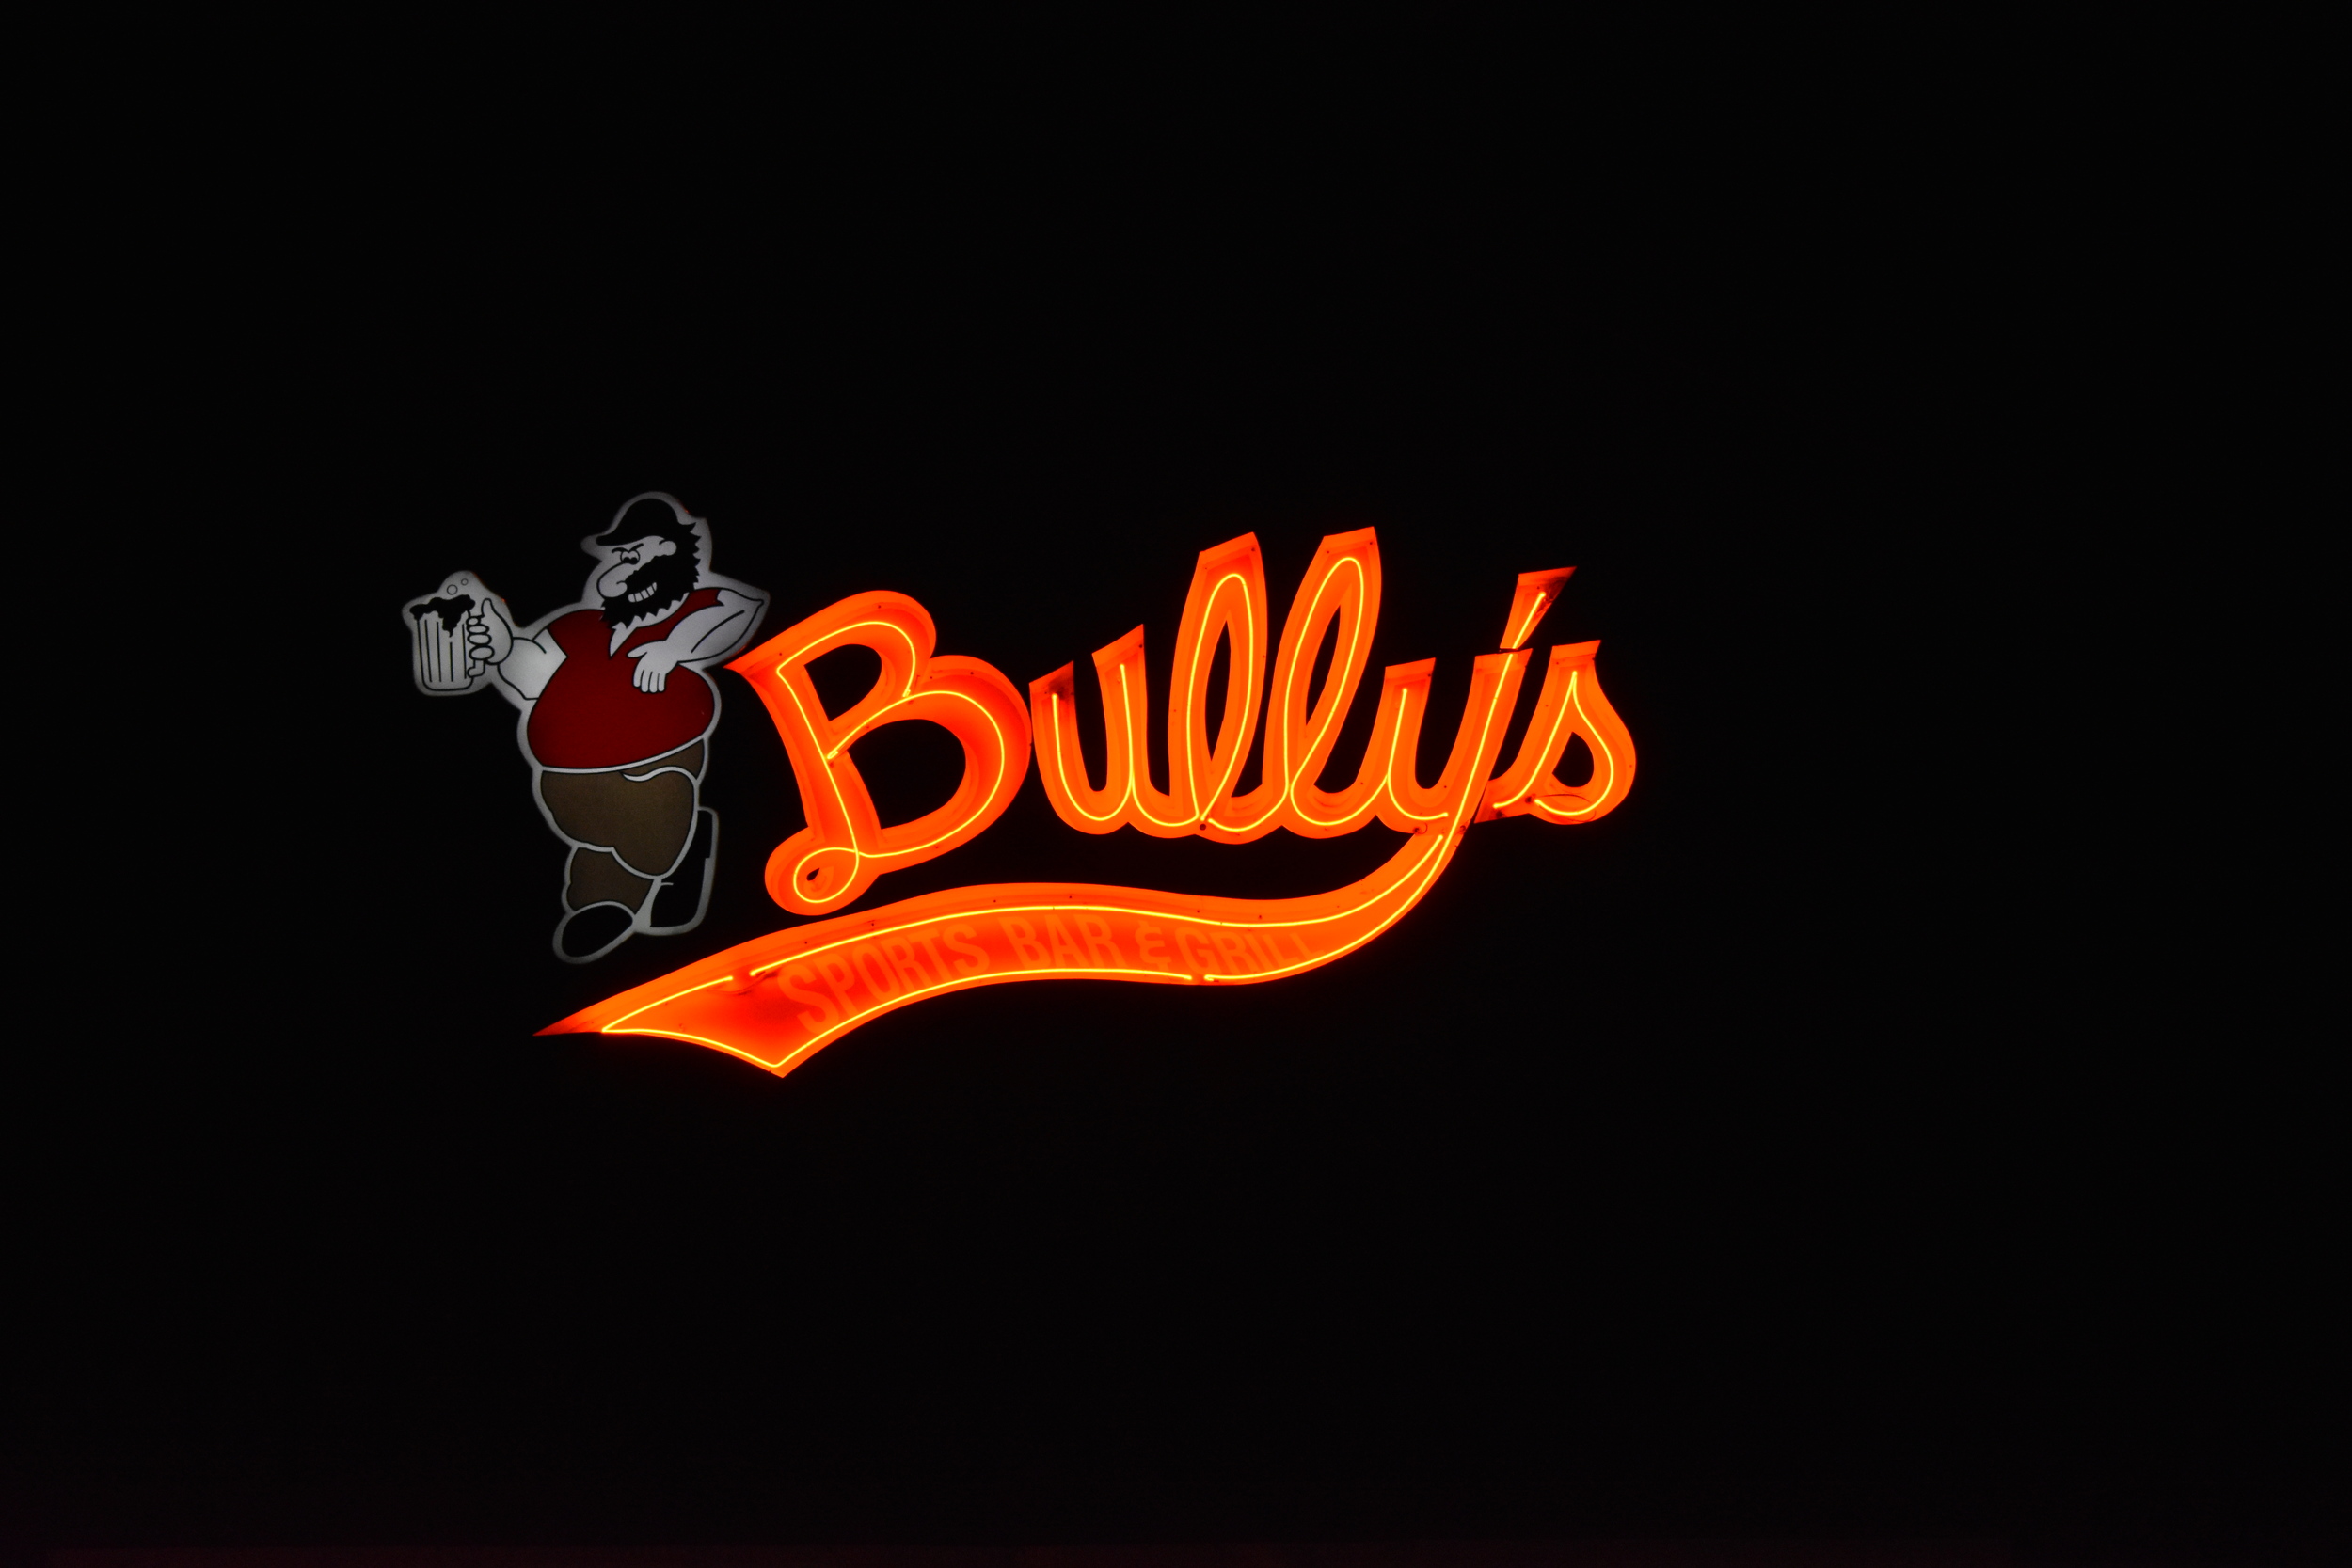 Bully's Sports Bar & Grill wall mounted sign, Sparks, Nevada